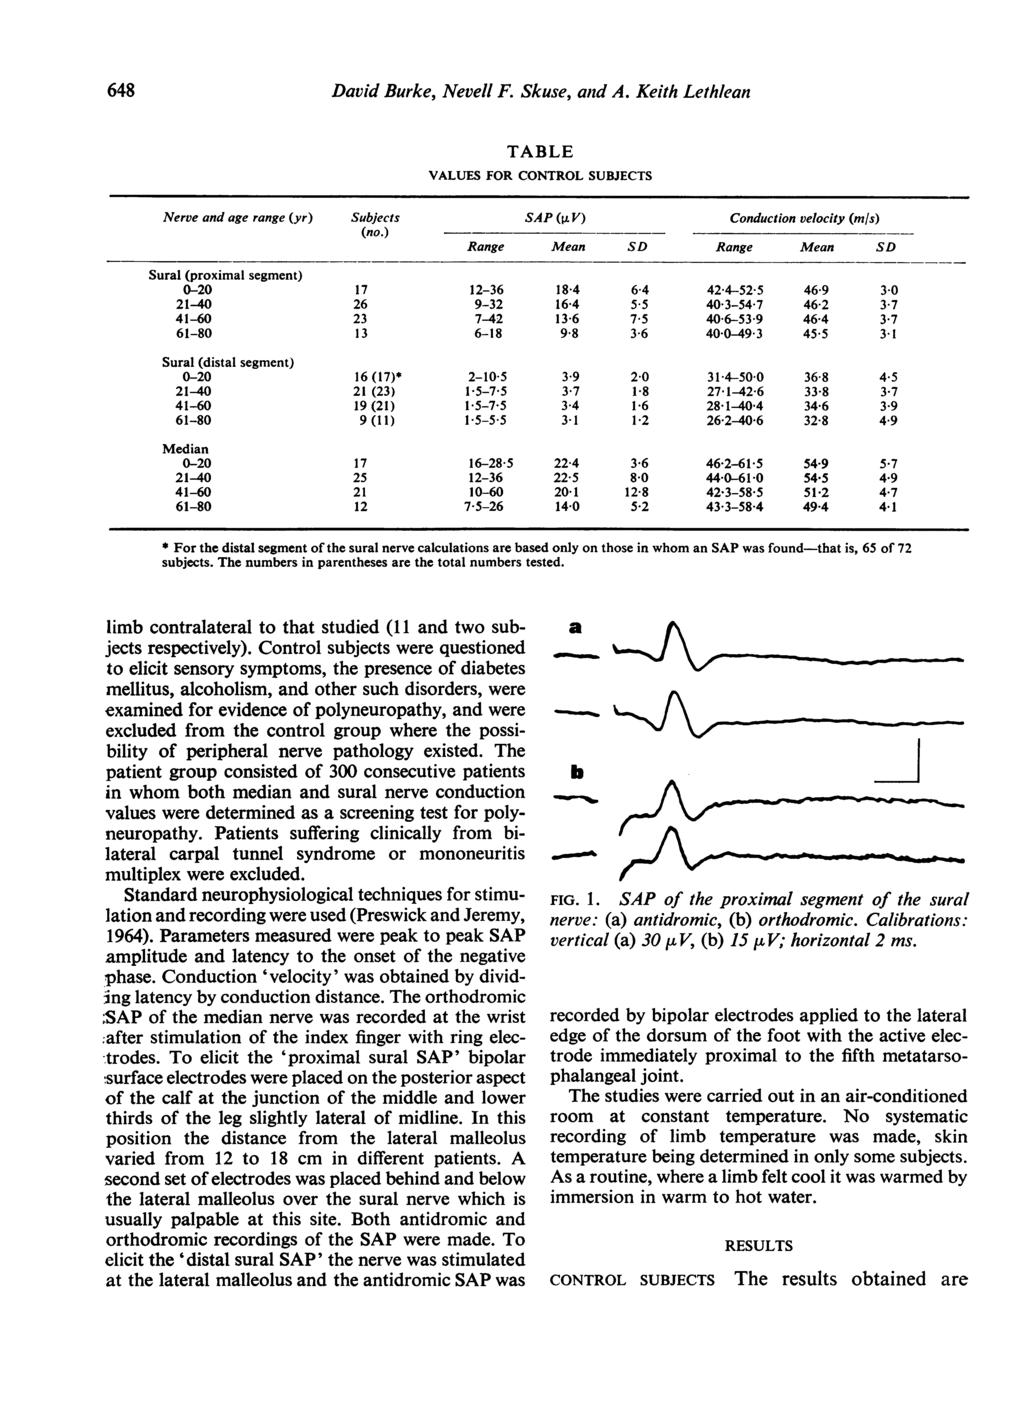 648 David Burke, Nevell F. Skuse, anid A. Keith Lethlean TABLE VALUES FOR CONTROL SUBJECTS Nerve and age range (yr) Subjects SAP (. V) Conduction velocity (nils) (no.